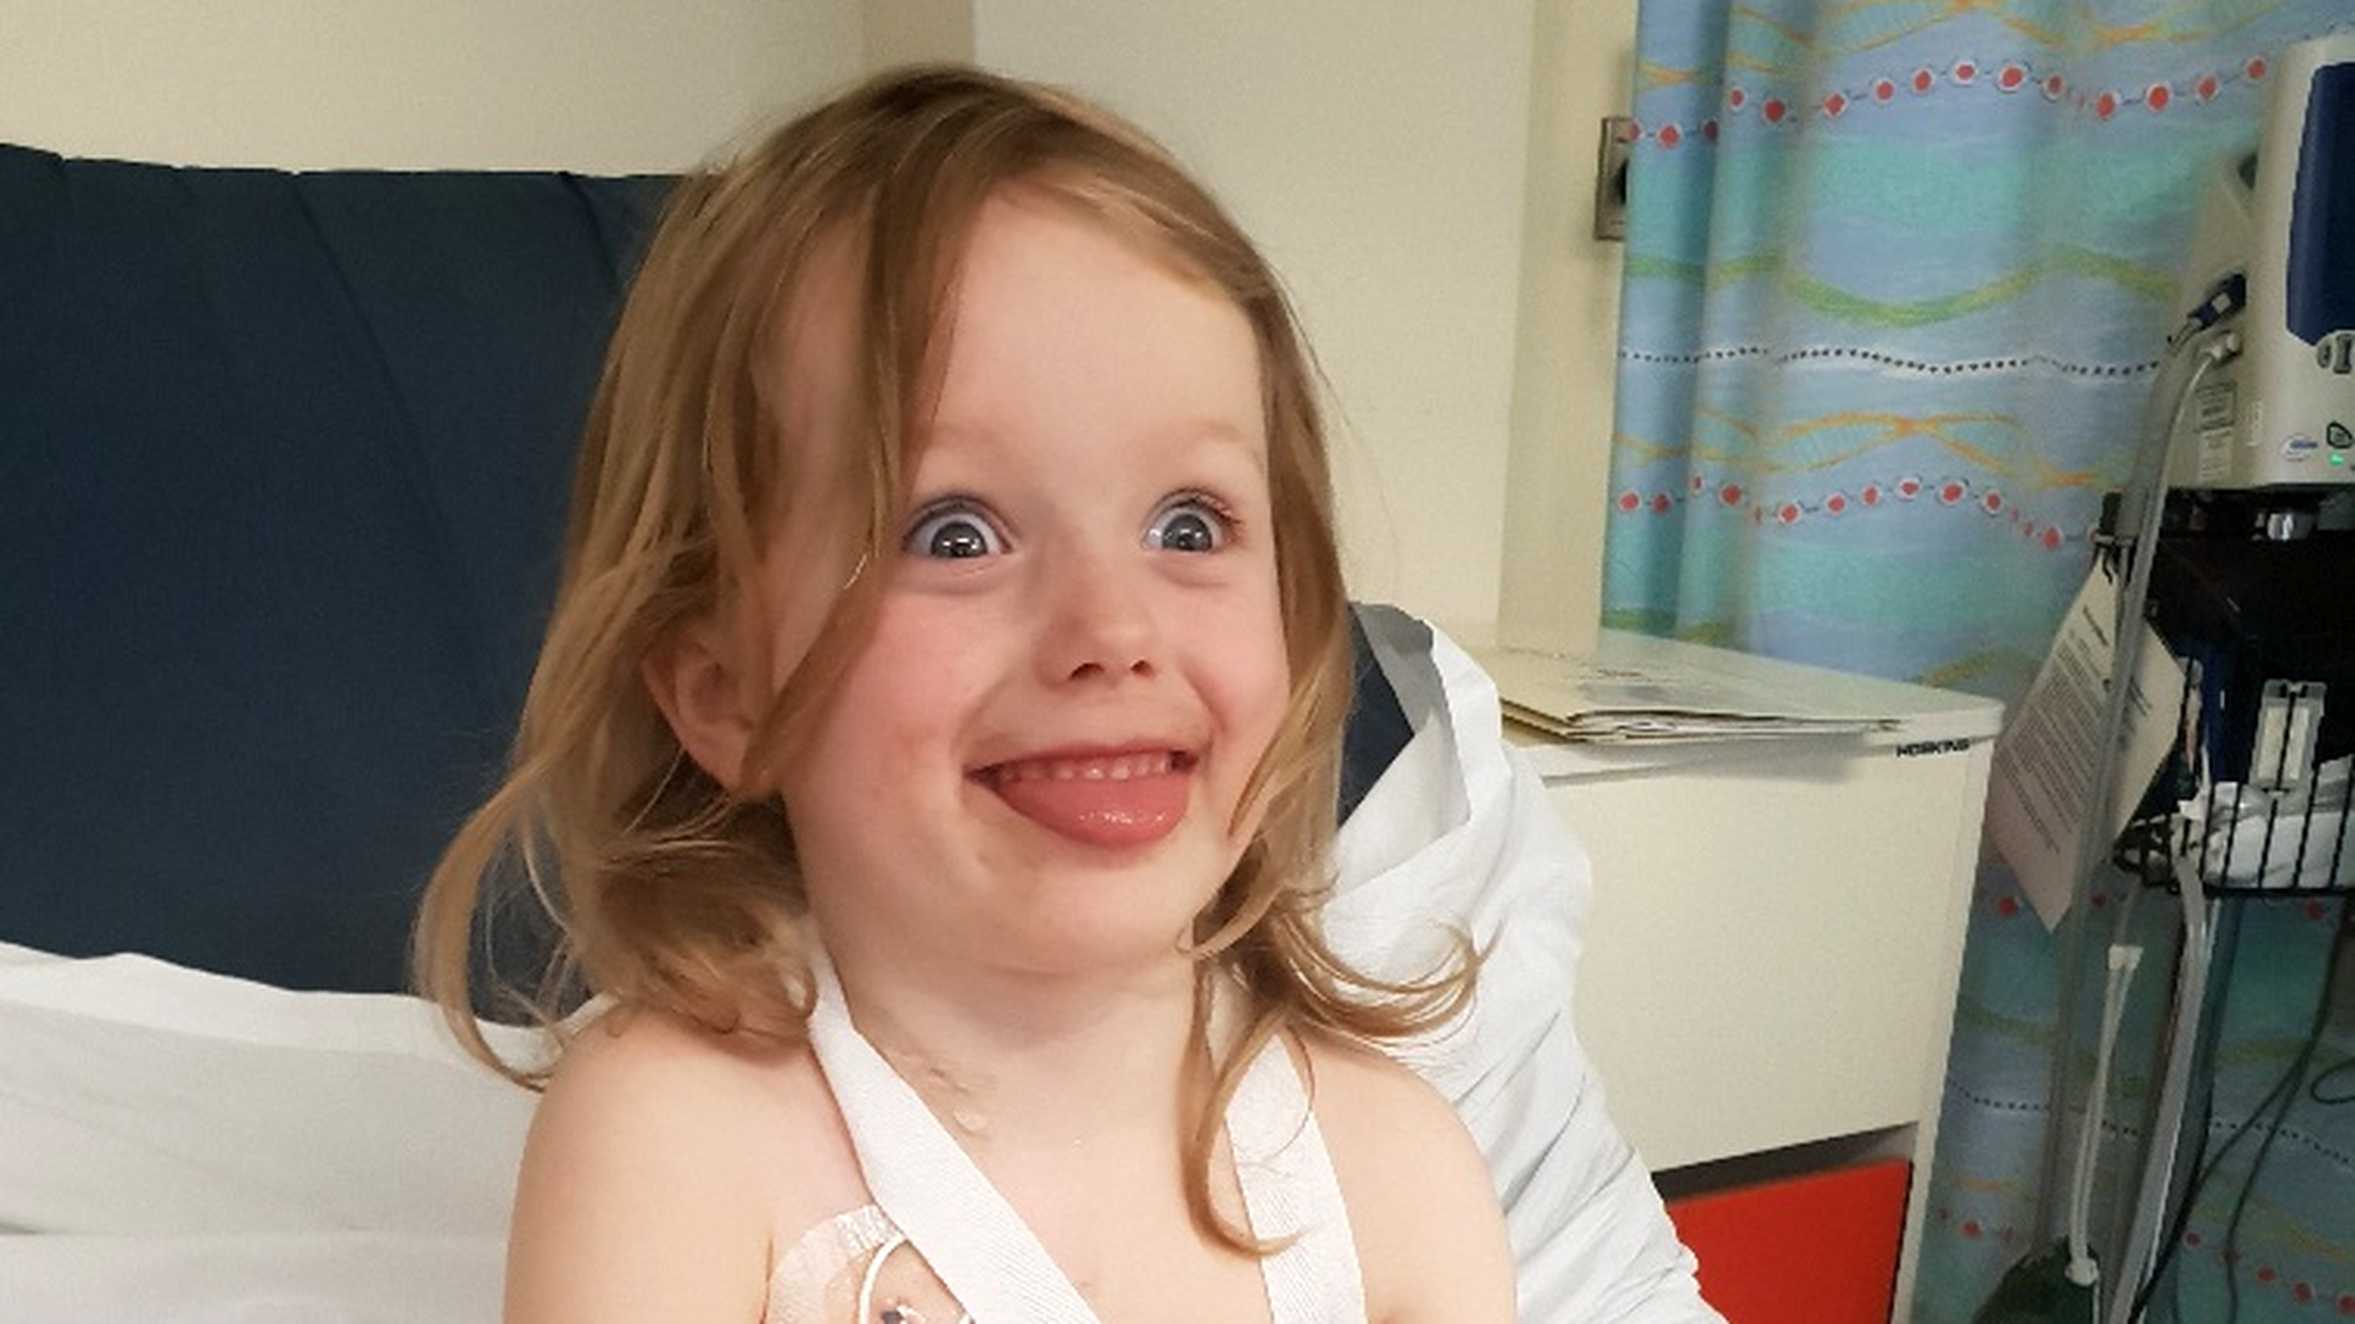 Lottie smiling bravely during her treatment in hospital.